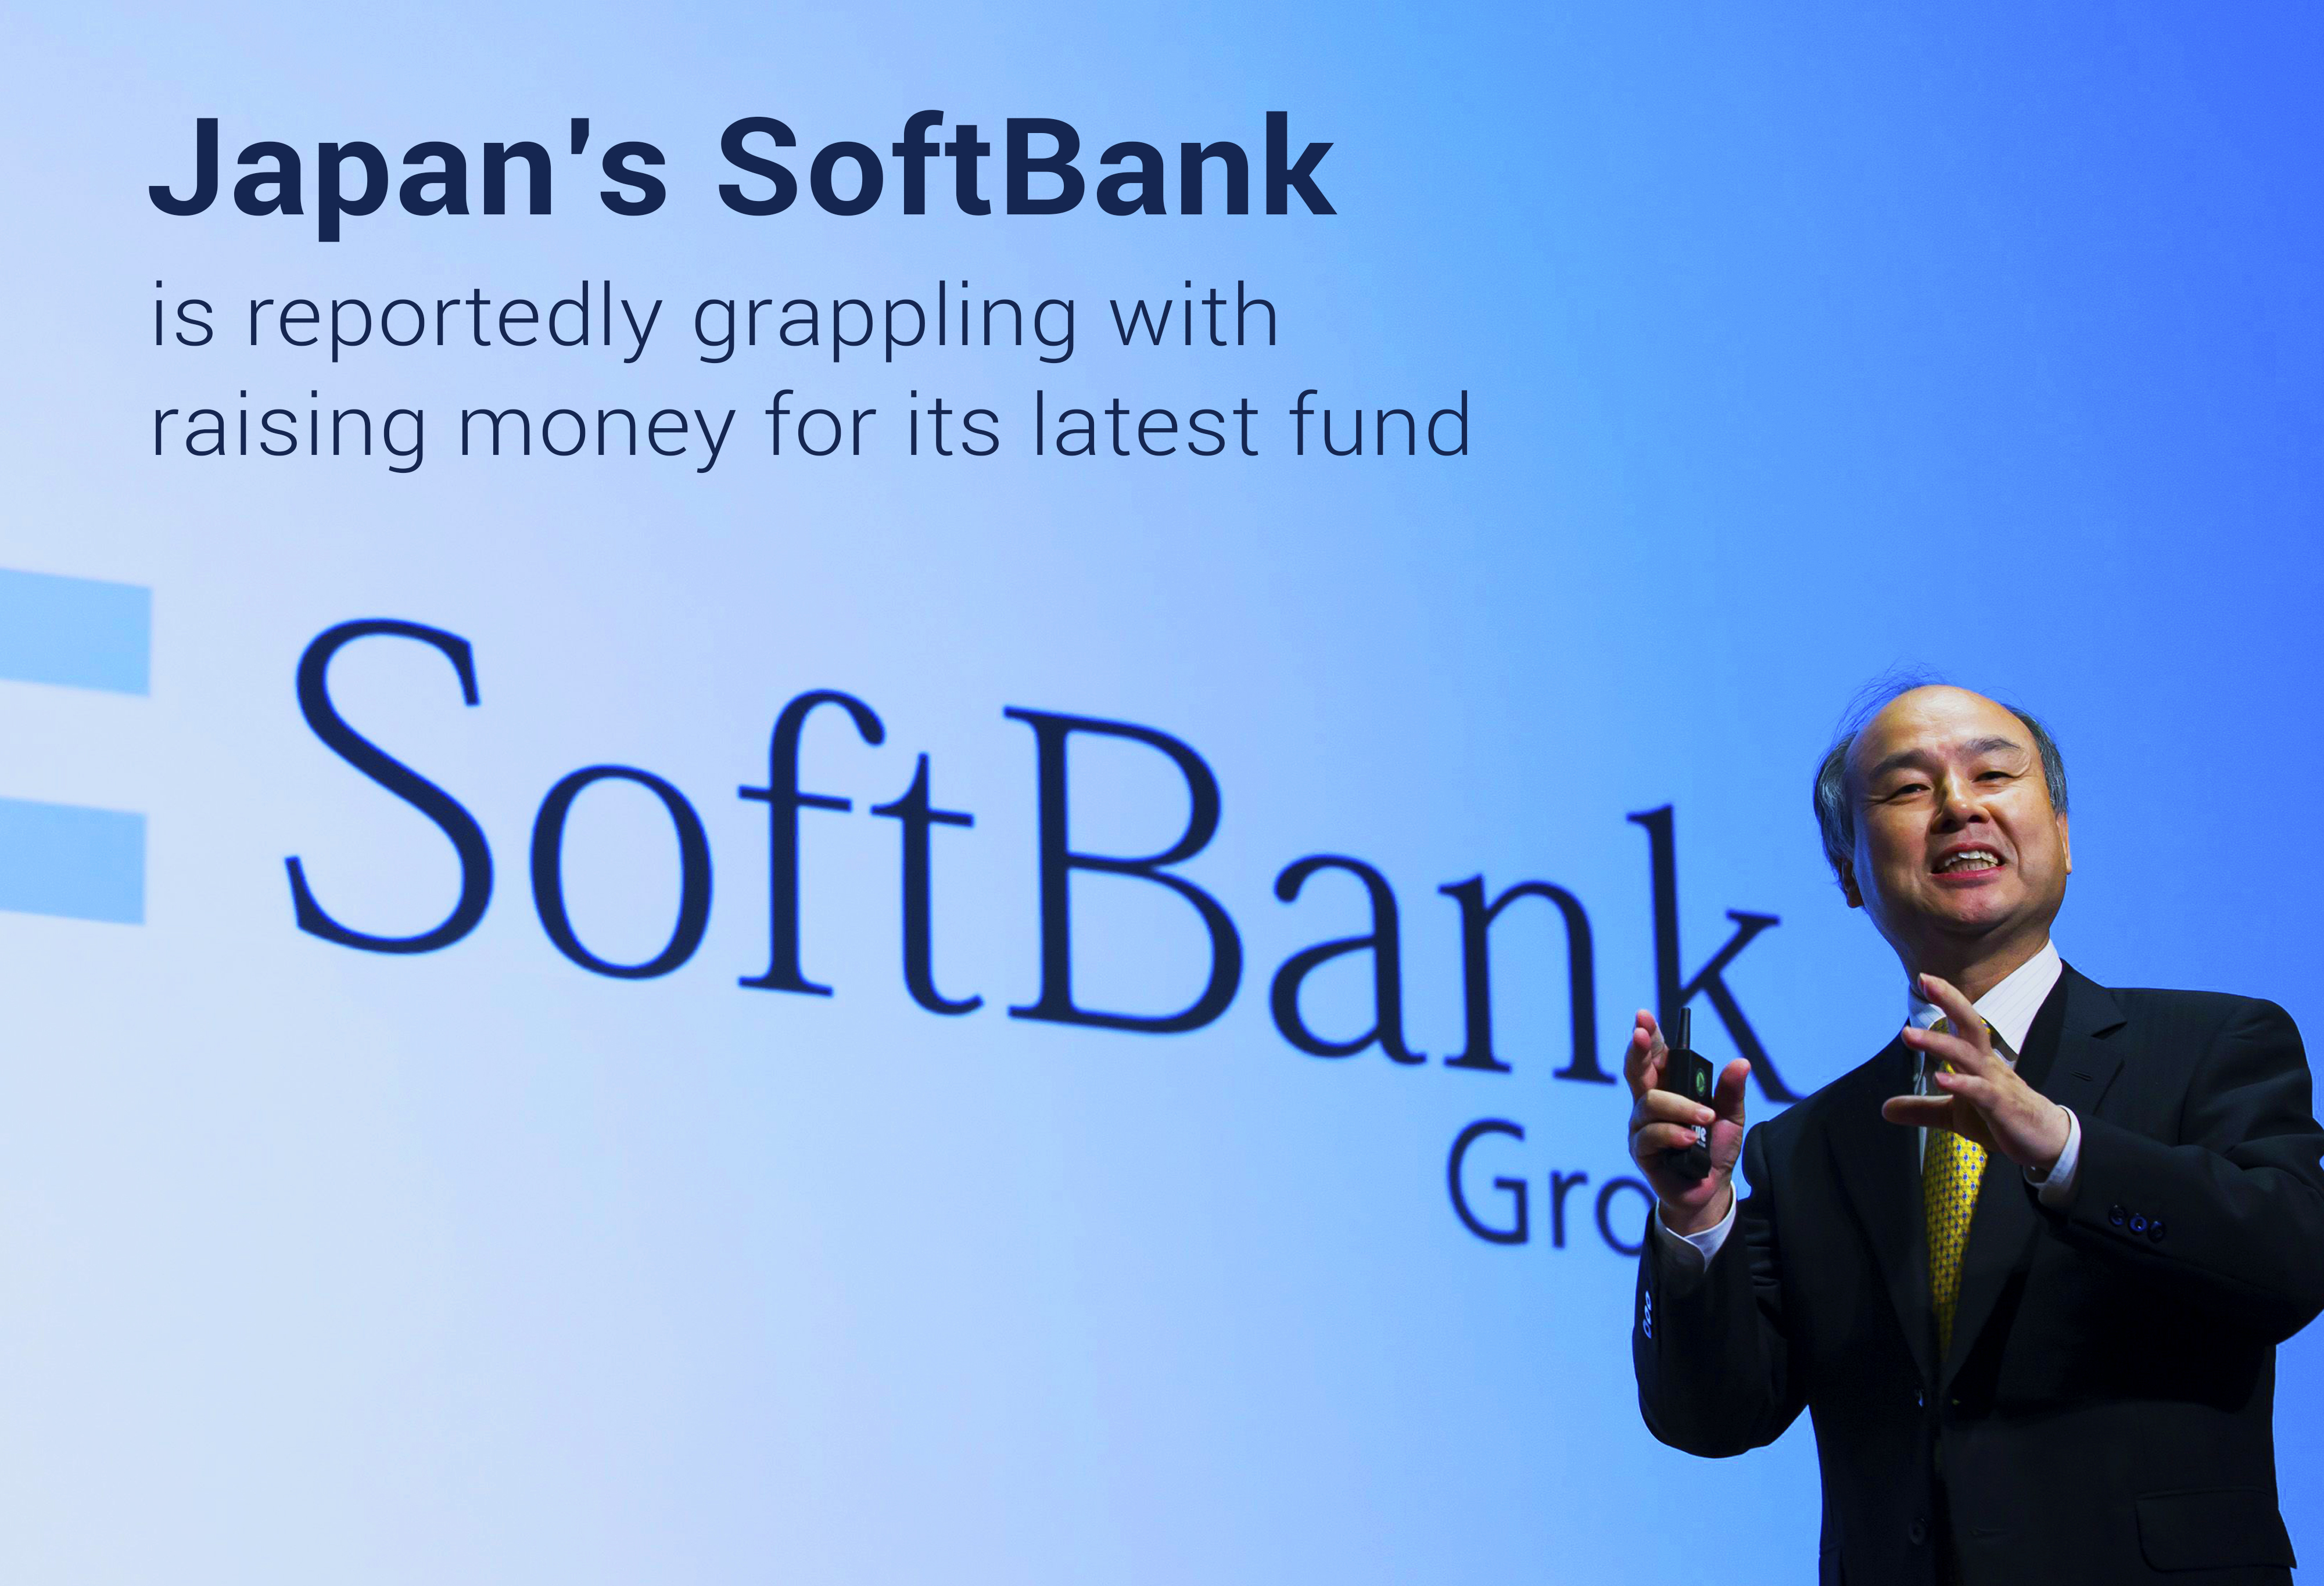 Softbank of Japan is grappling with Money Raising for Latest Fund